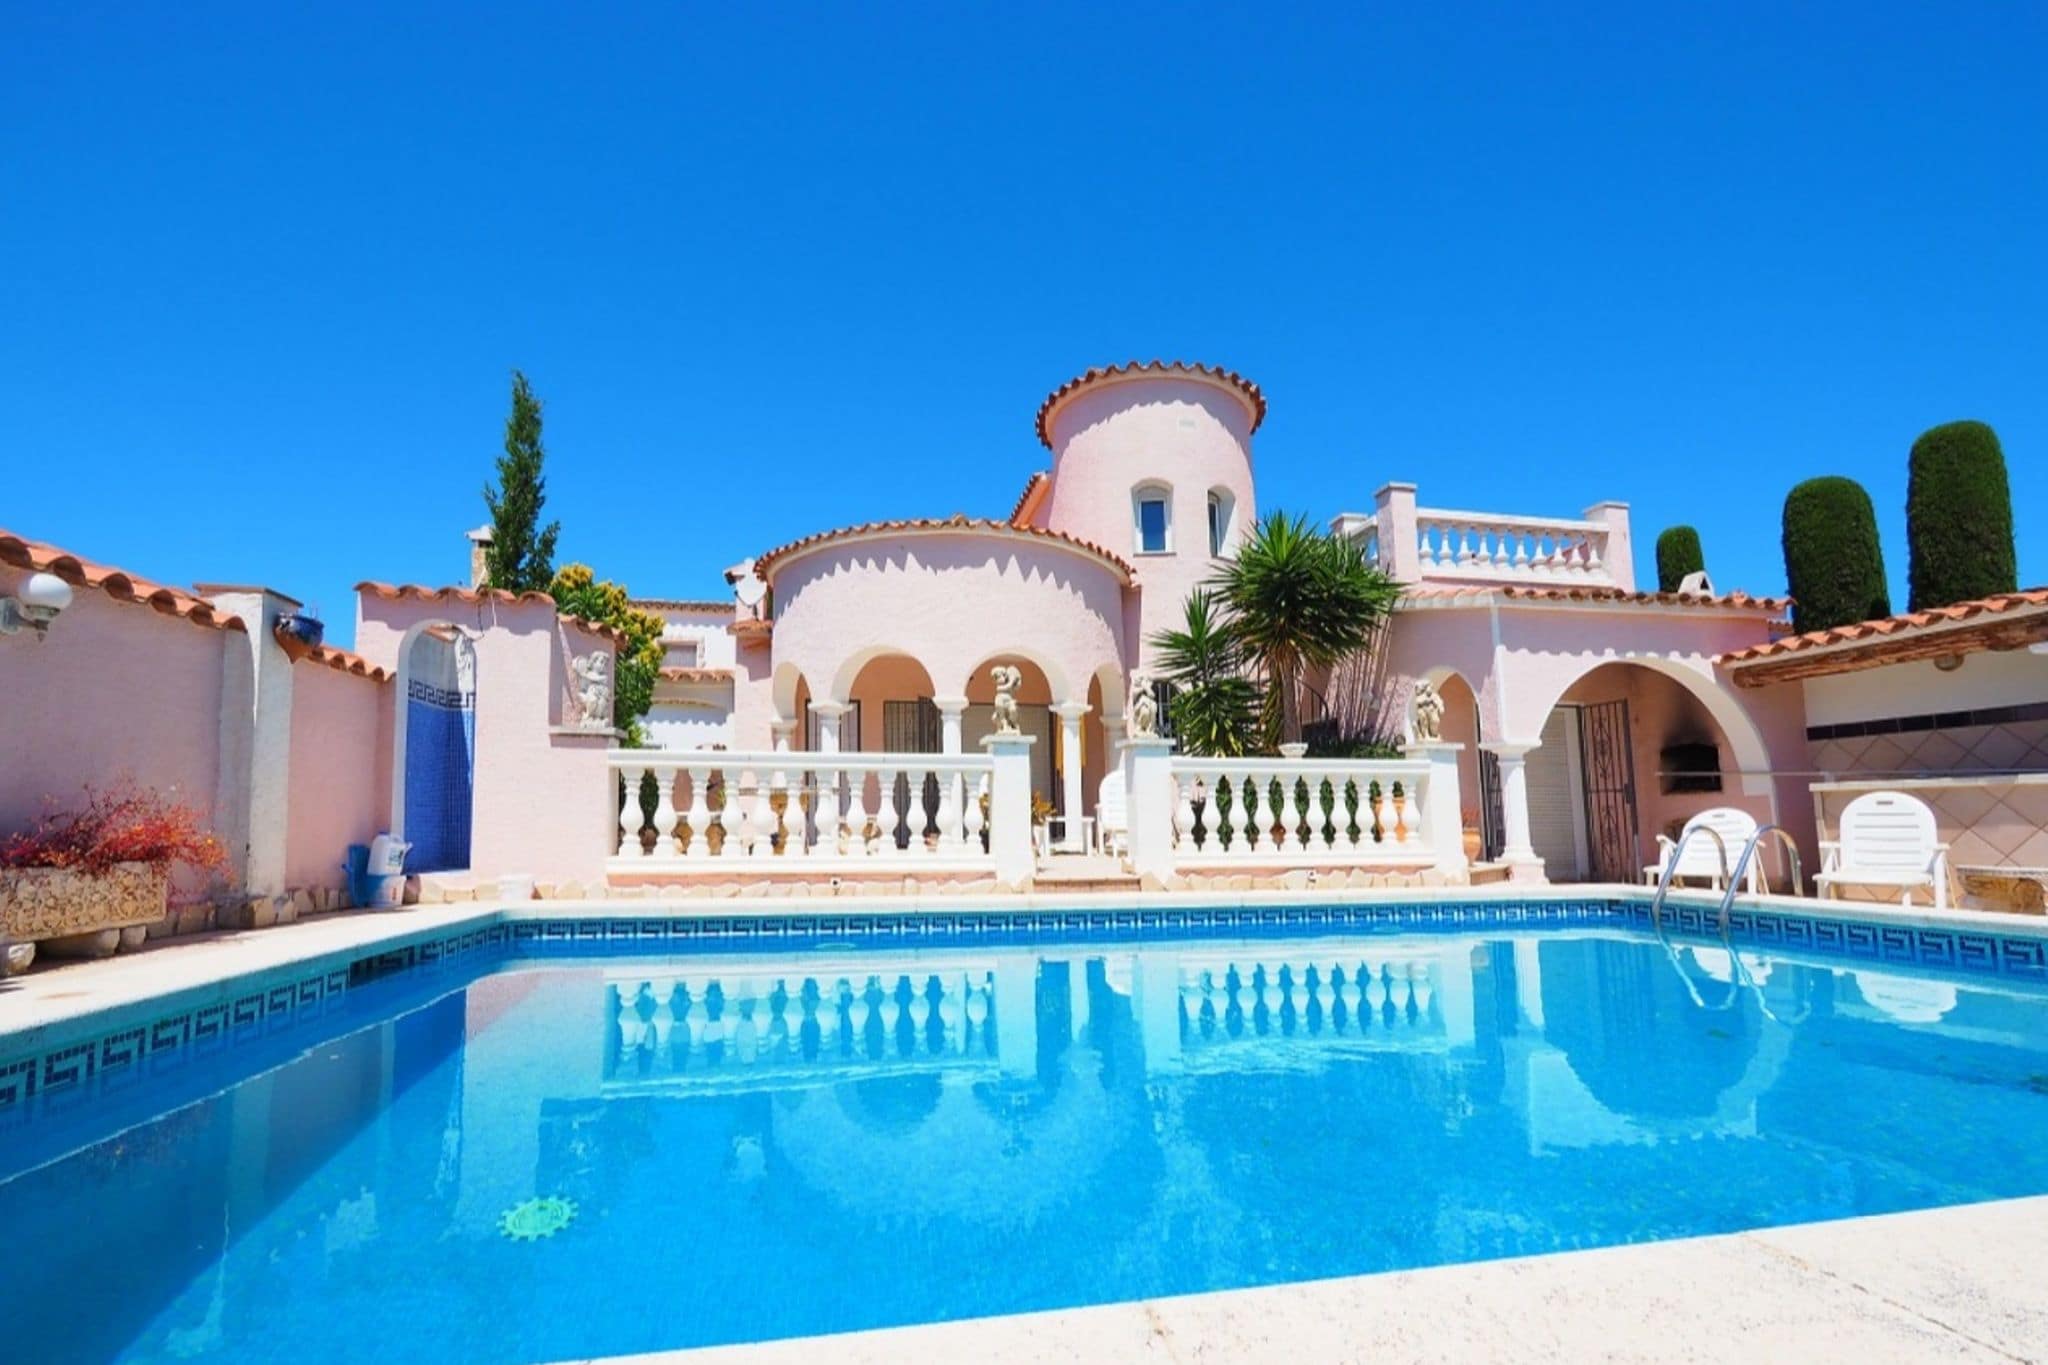 Villa in Empuriabrava with private pool suitable for families up to 6 people